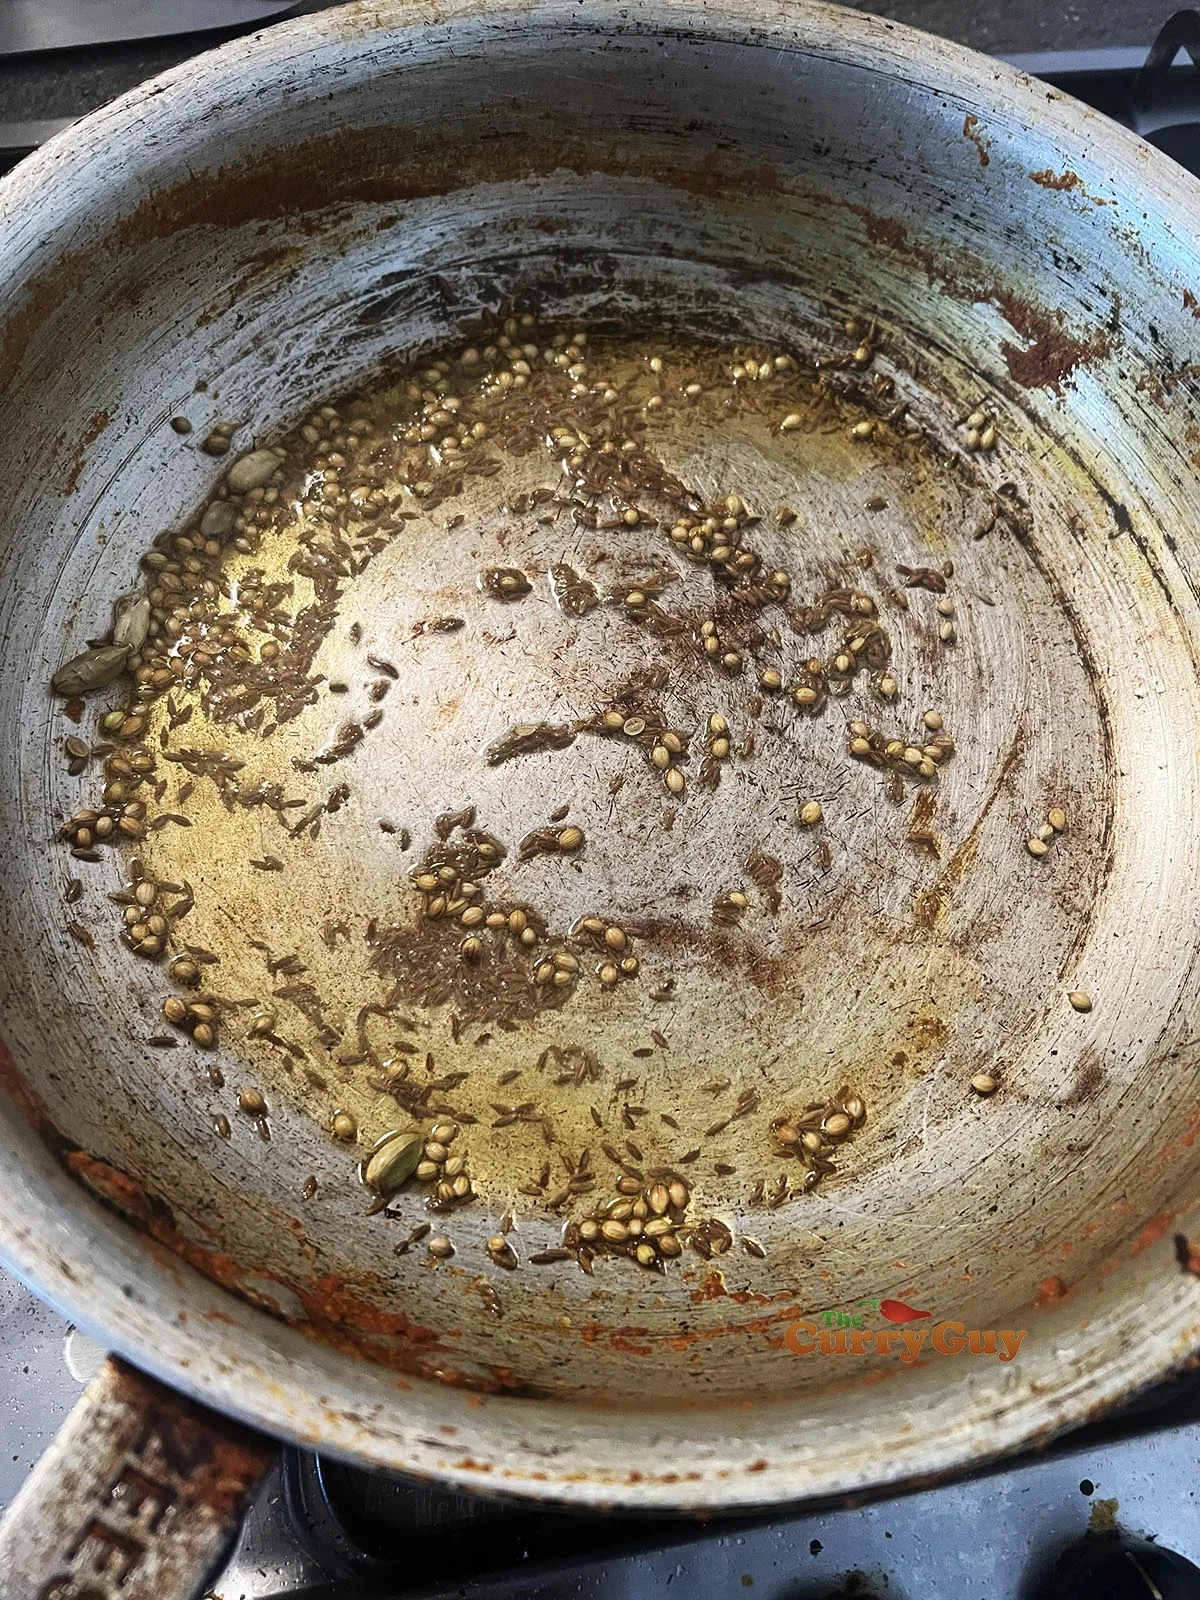 Infusing whole spices in oil.